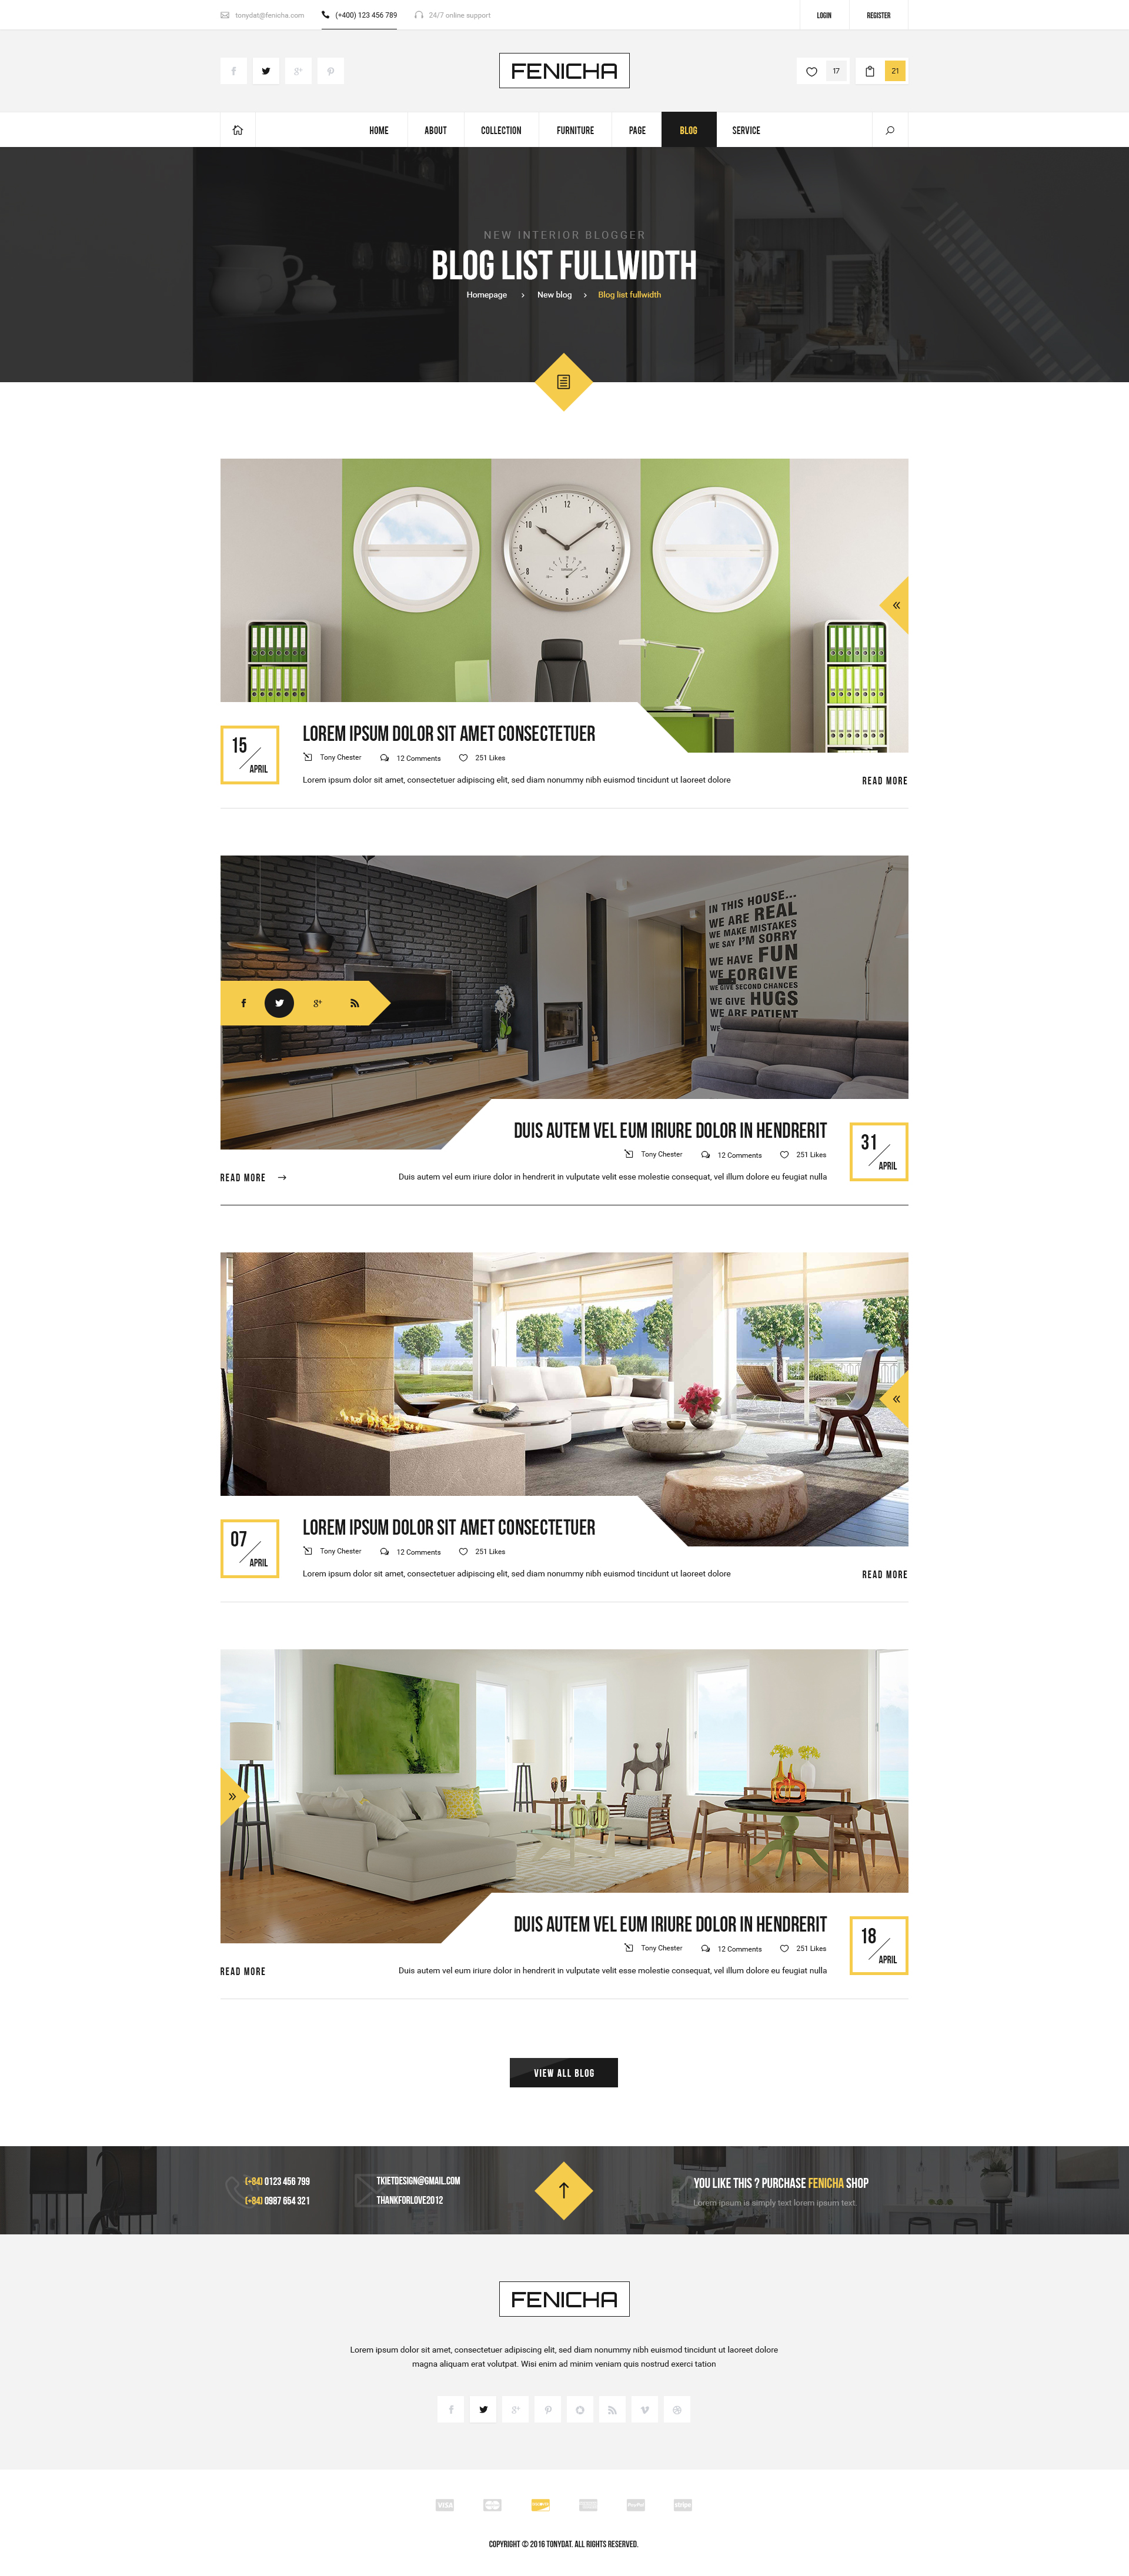 Fenicha - Interior & Furniture Store PSD Templates by tonydat ...  ... Previews/37-blog-grid-2-columns-with-sidebar.jpg  Previews/38-blog-details-fullwidth.jpg  Previews/39-blog-details-with-sidebar.jpg ...